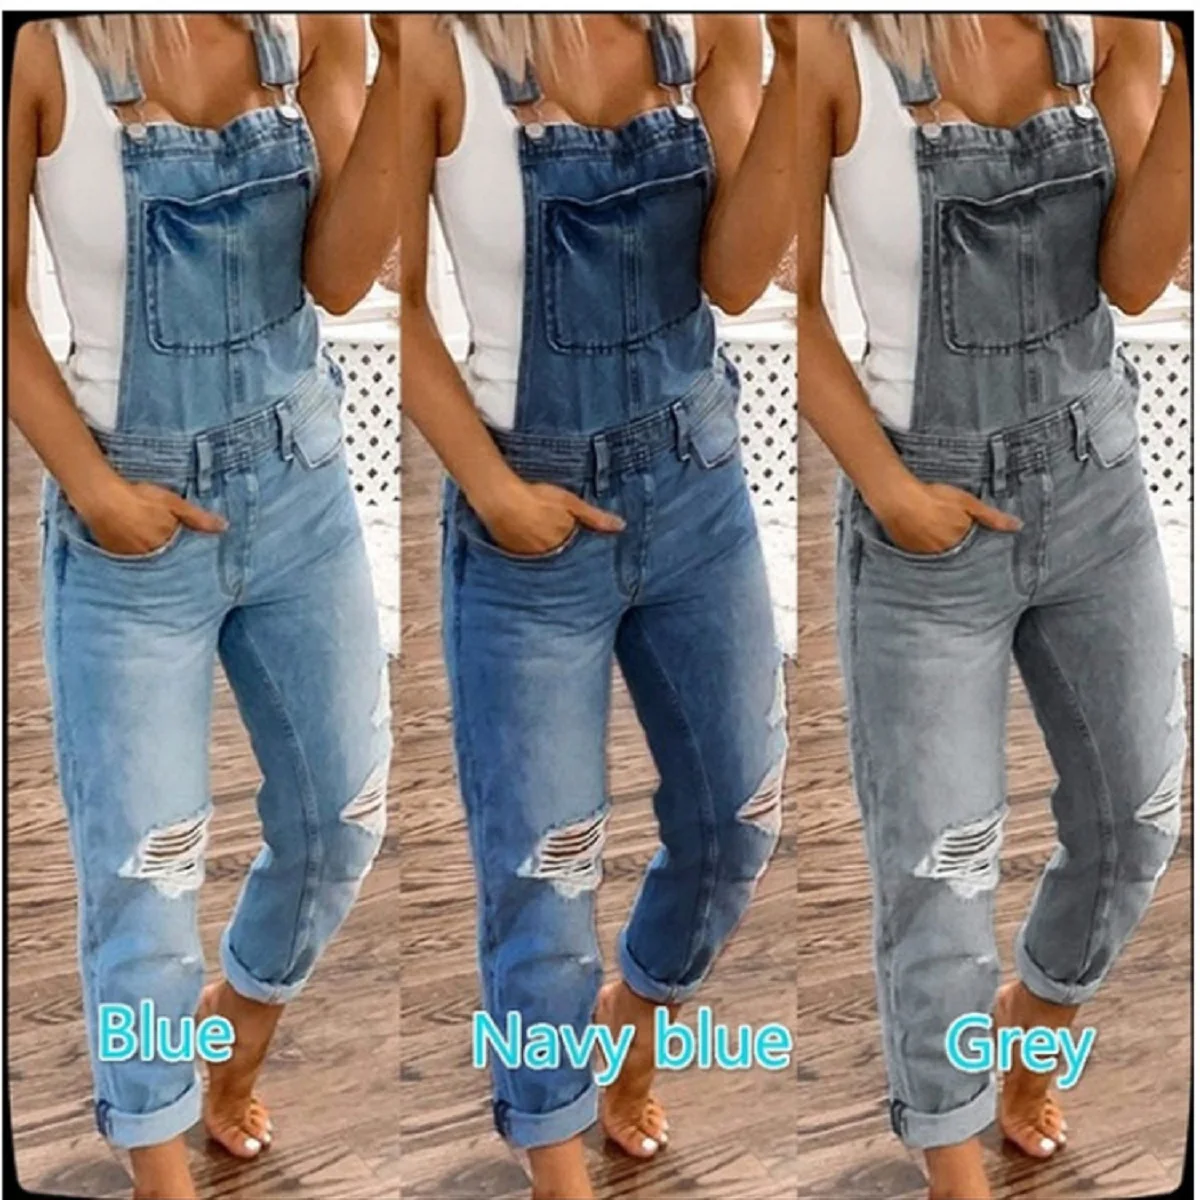 Maternity Jeans Bib Pant Suspender Trouser New Casual Female Women's Clothing Demin One-Piece Romper Overalls Jumpsuit Plus Size new women s y word wide band sexy skinny back demin pants high waist handmade frayed jeans female overalls